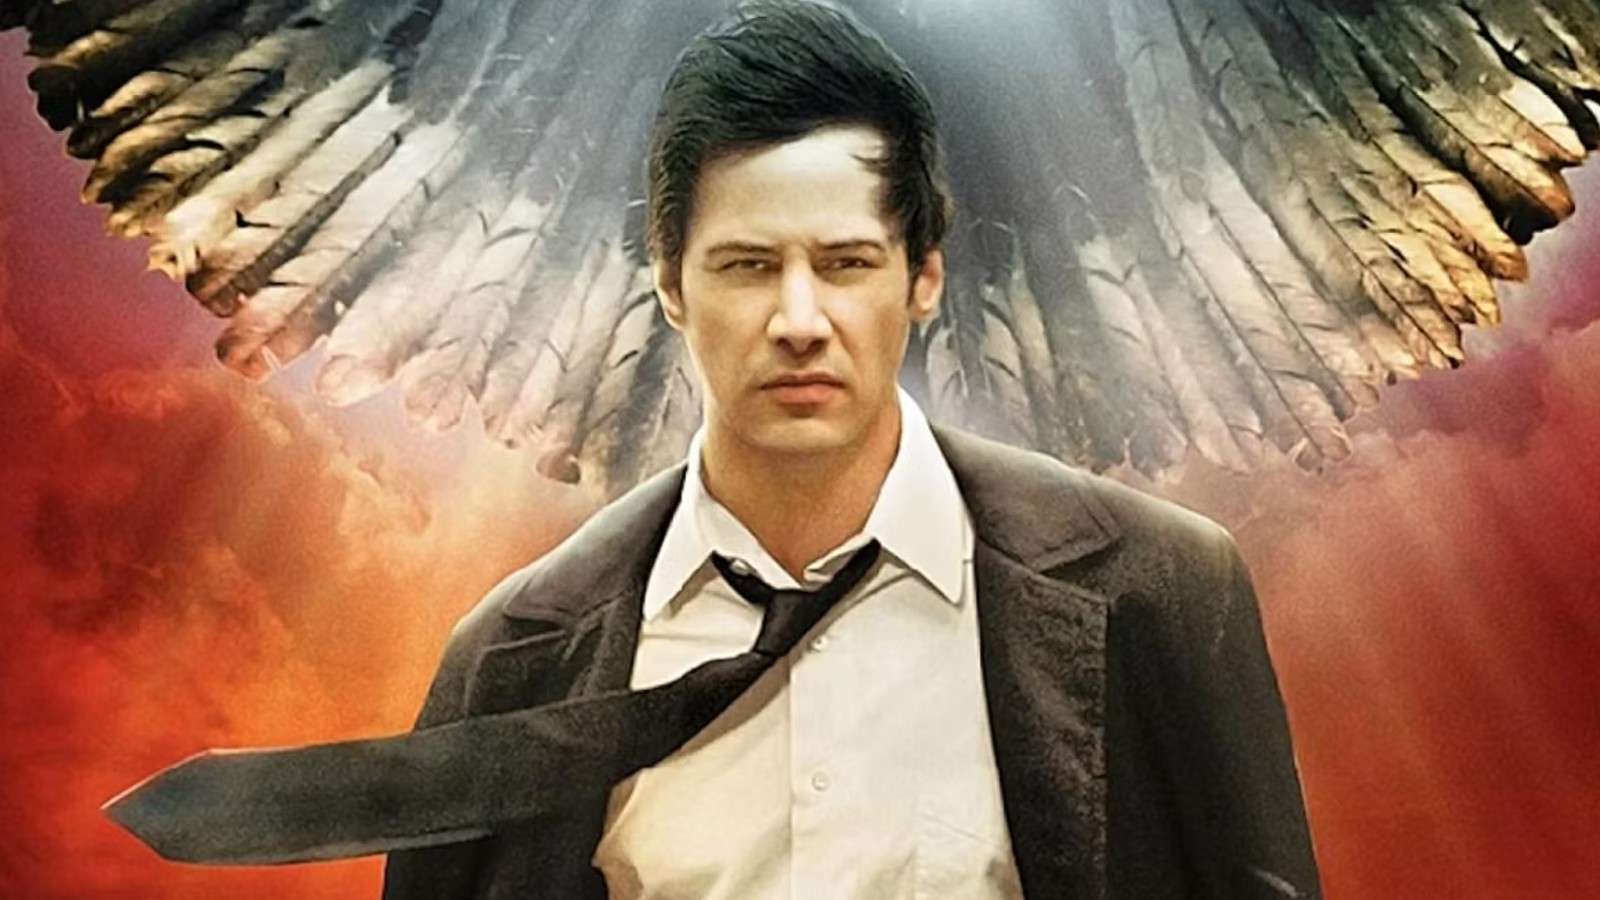 Keanu Reeves as Constantine, who's expected to return for Constantine 2